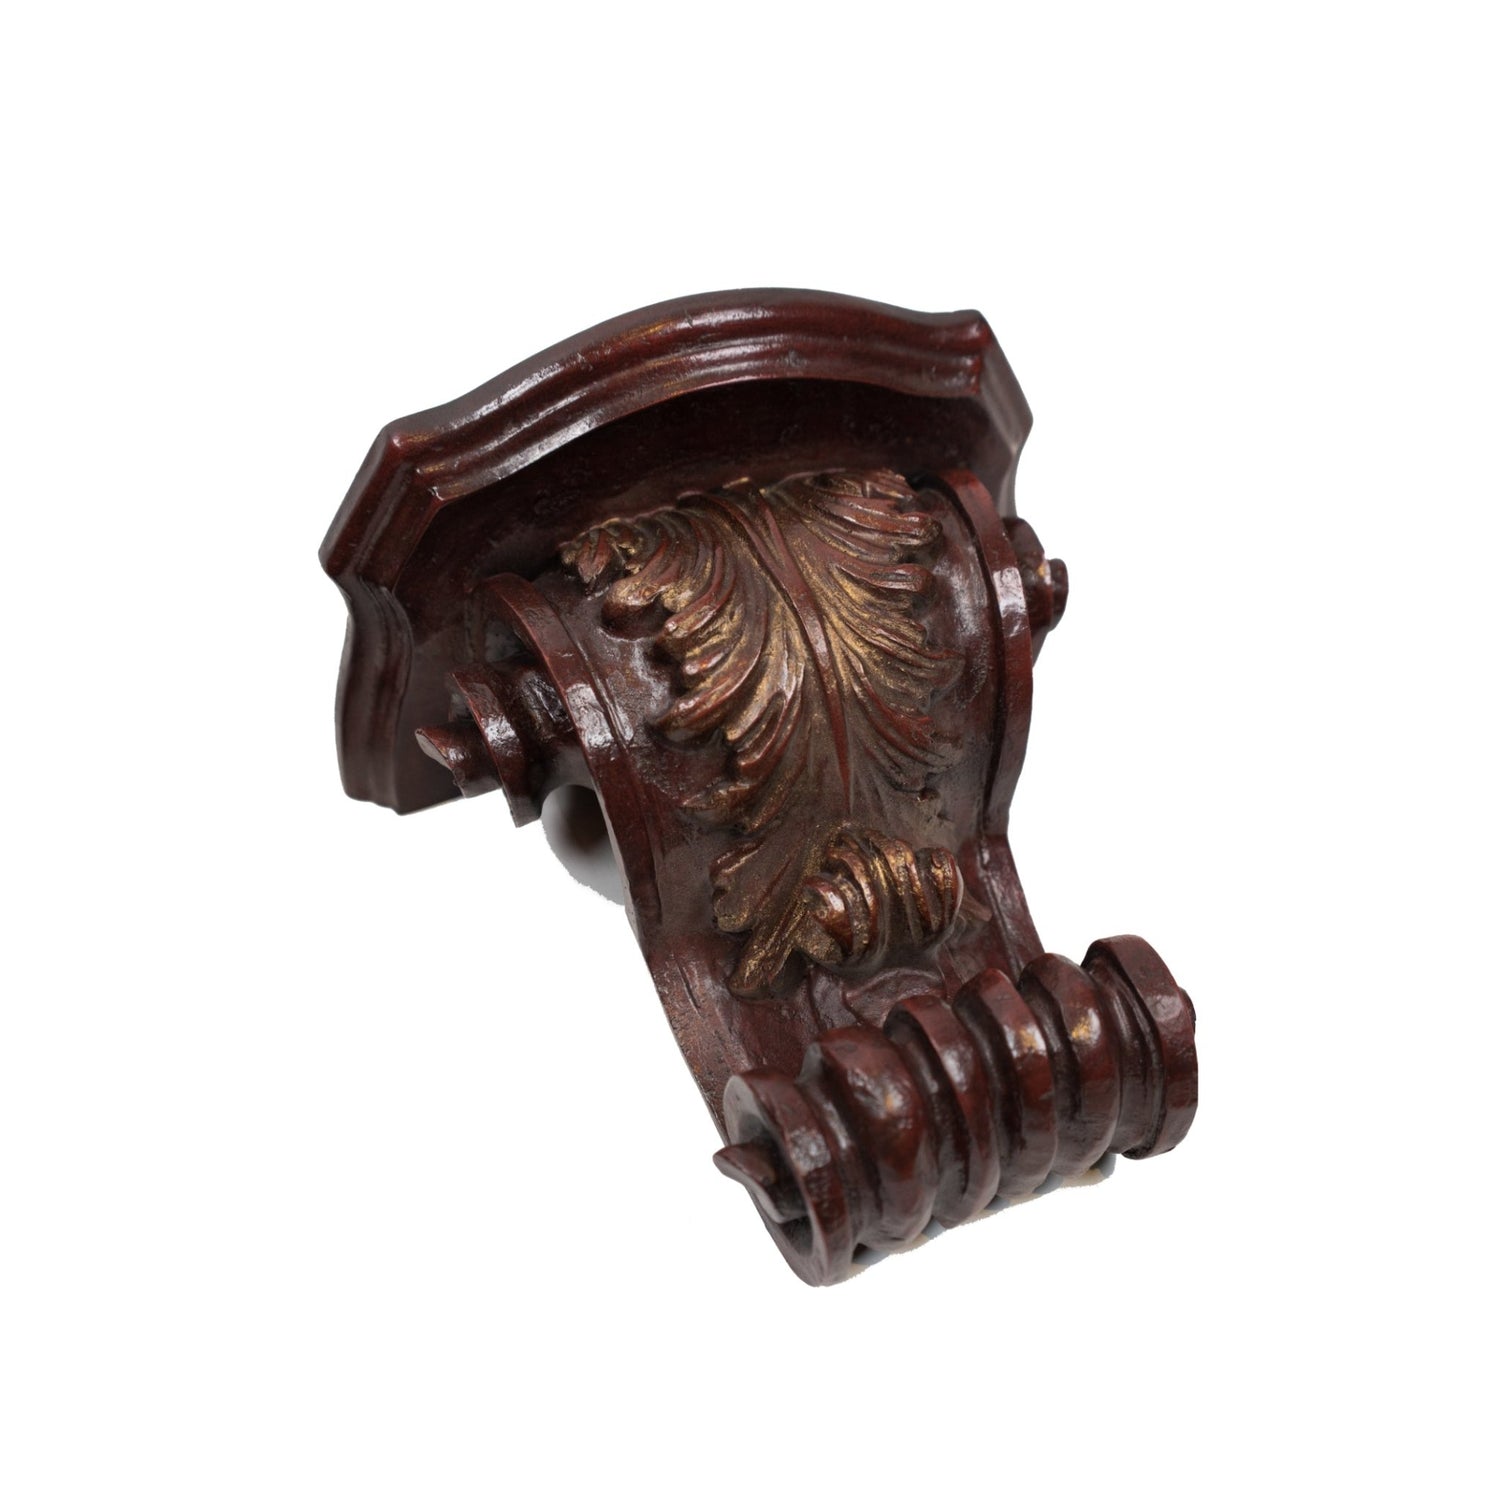 Pair of Carved Wooden Wall Bracket - Sirdab - Unknown